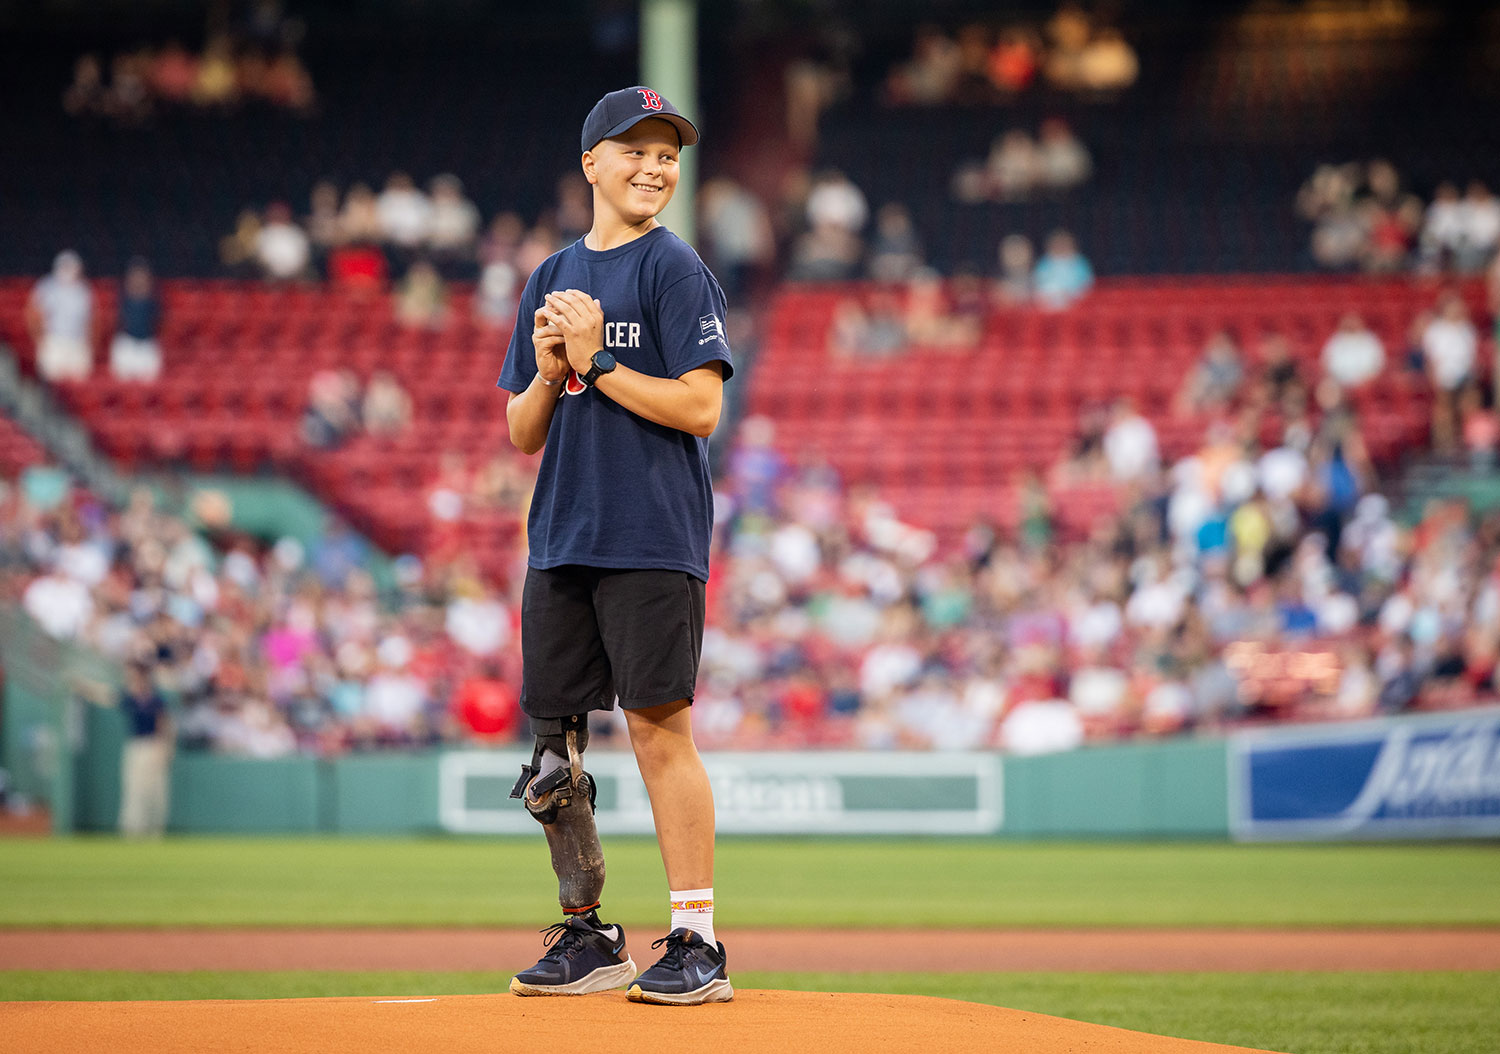 Young Dana-Farber patient preparing to throw a baseball at Fenway Park